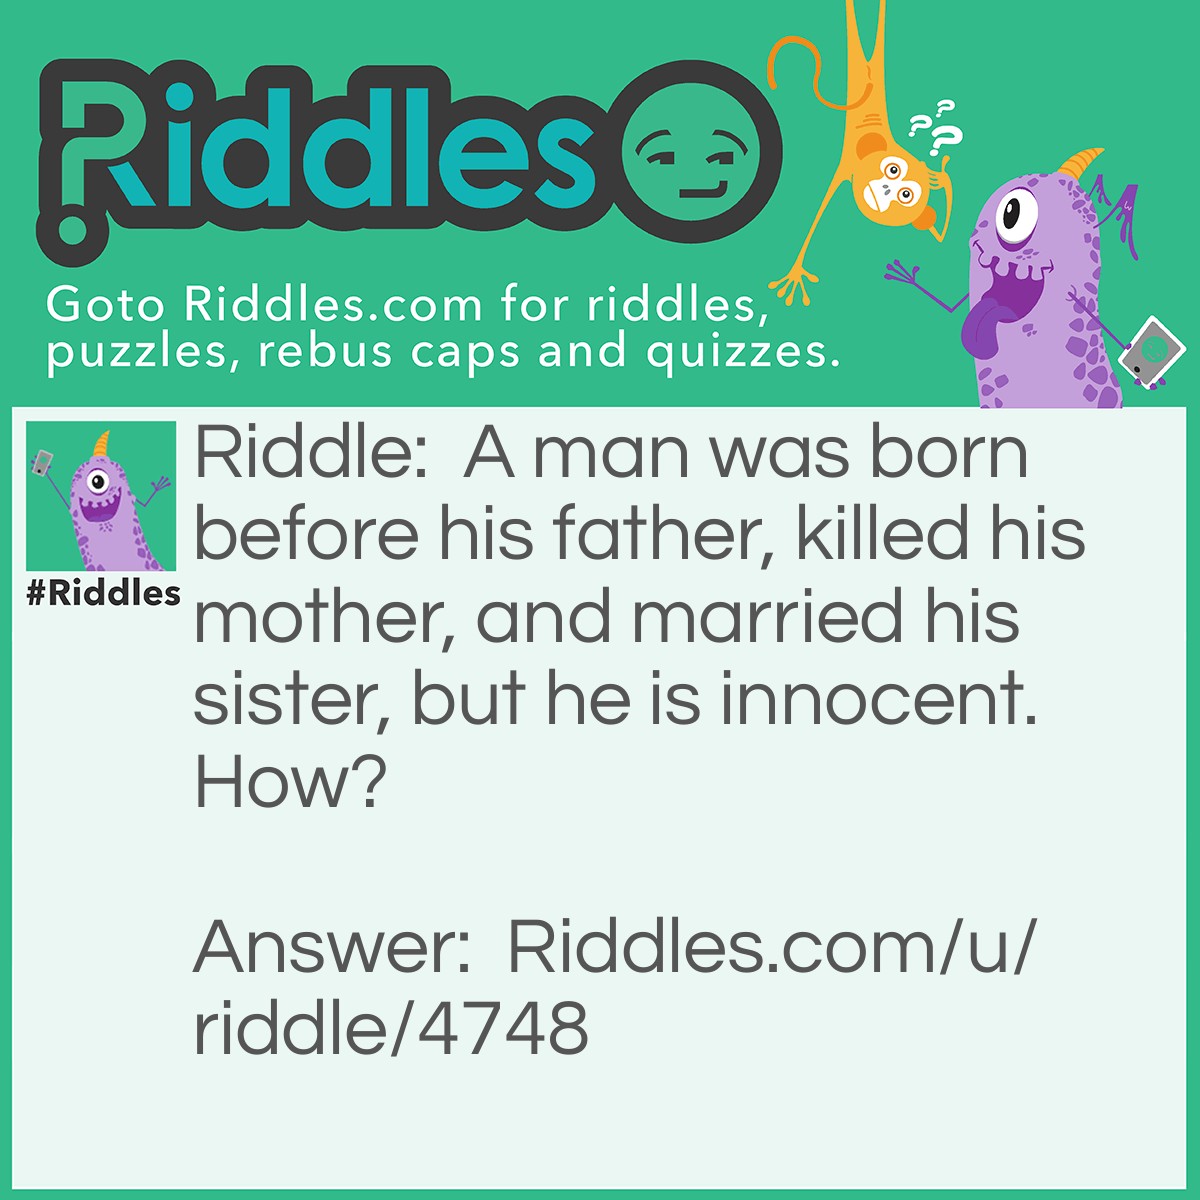 Riddle: A man was born before his father, killed his mother, and married his sister, but he is innocent. How? Answer: His father was standing in front of him when he was born and during his birth his mother died. He later grew up to be a priest and used the power vested in him as a priest to get his sister married.